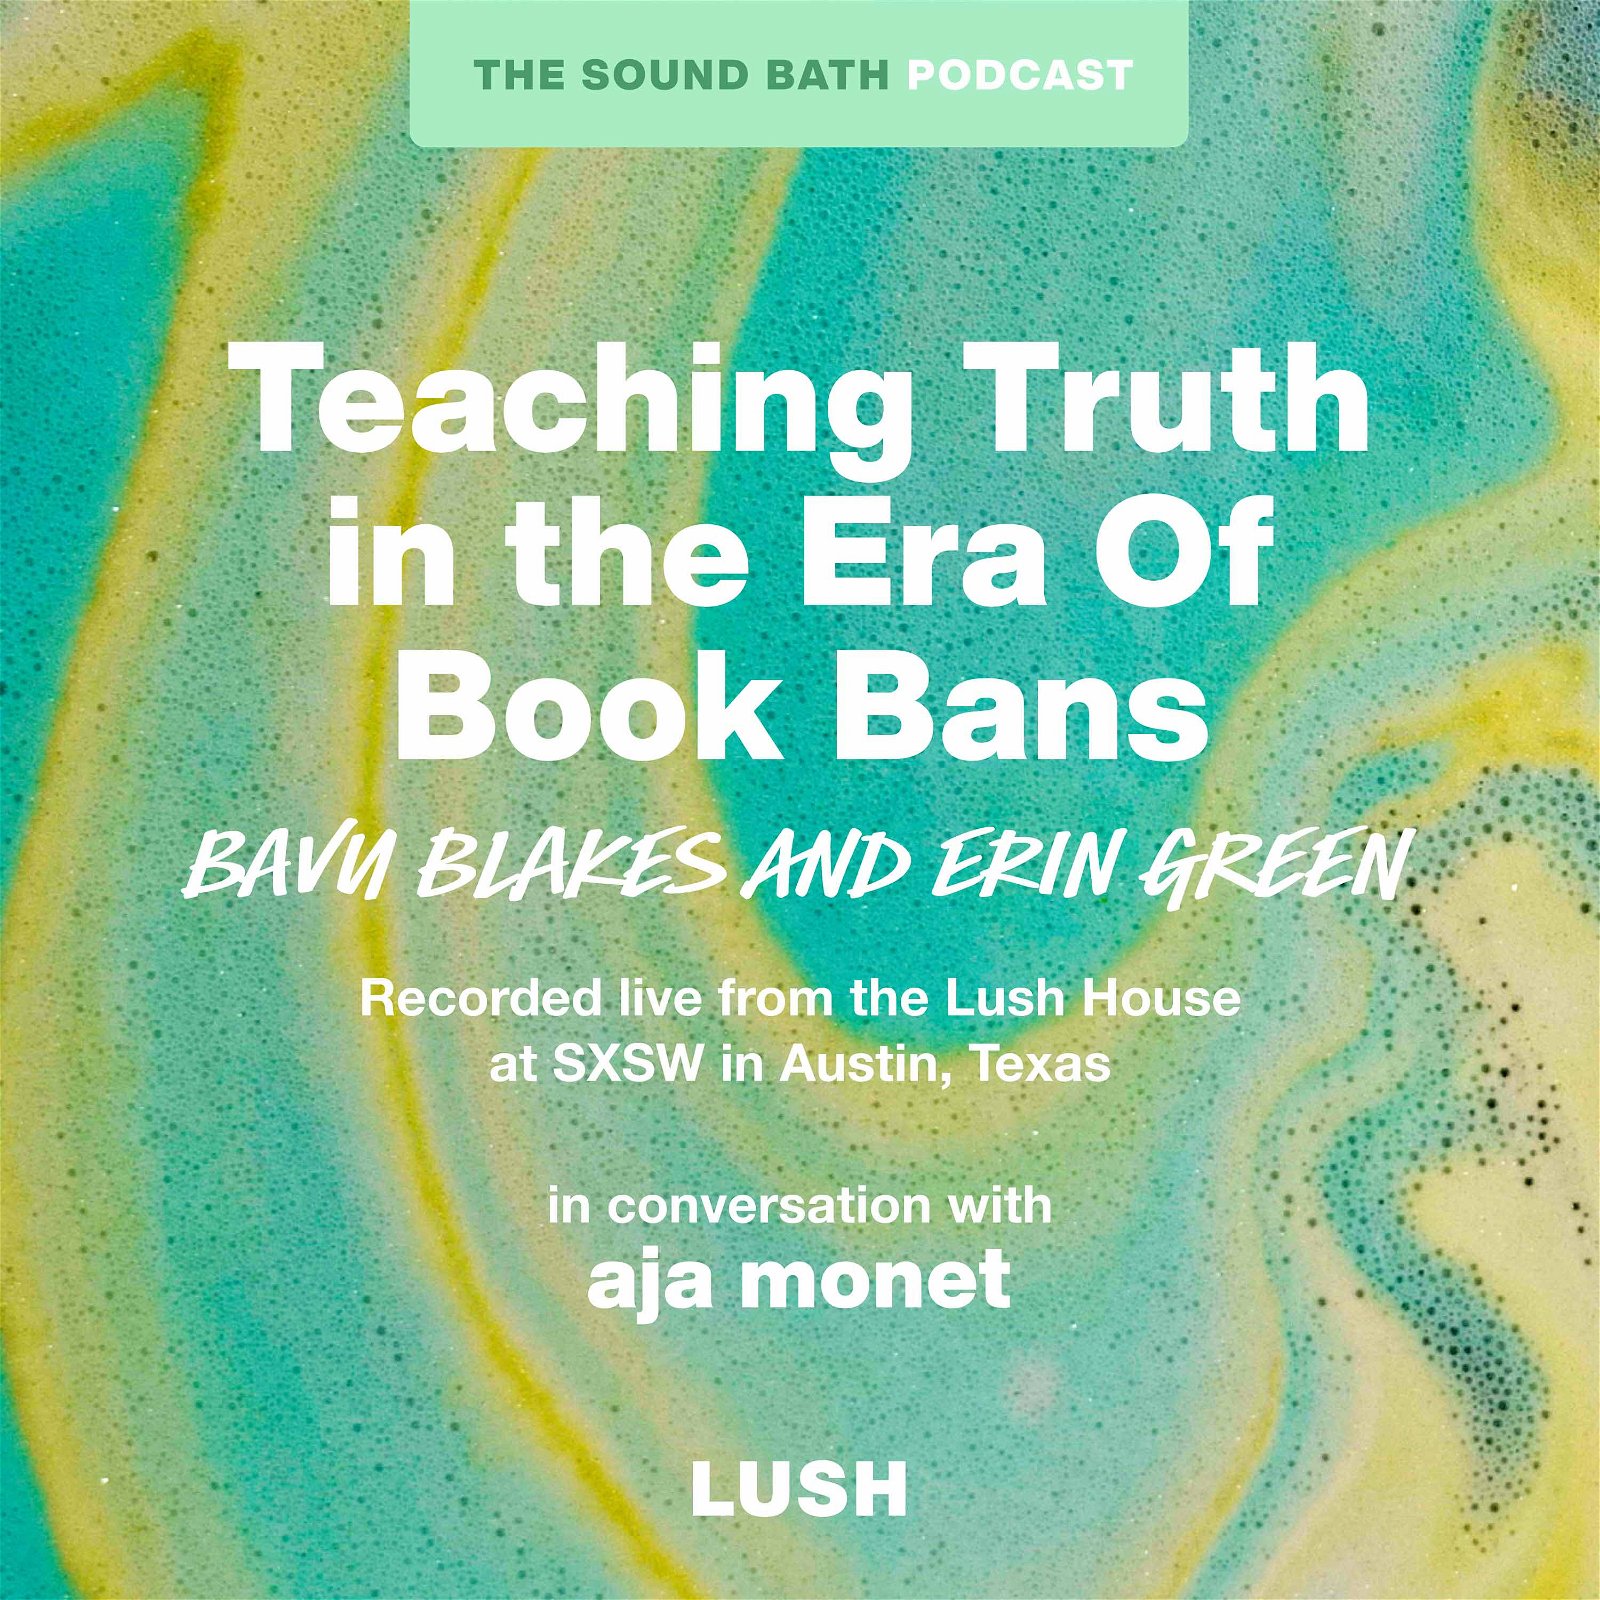 Teaching Truth In The Era Of Book Bans - Live from SXSW with Erin Green & Bavu Blakes